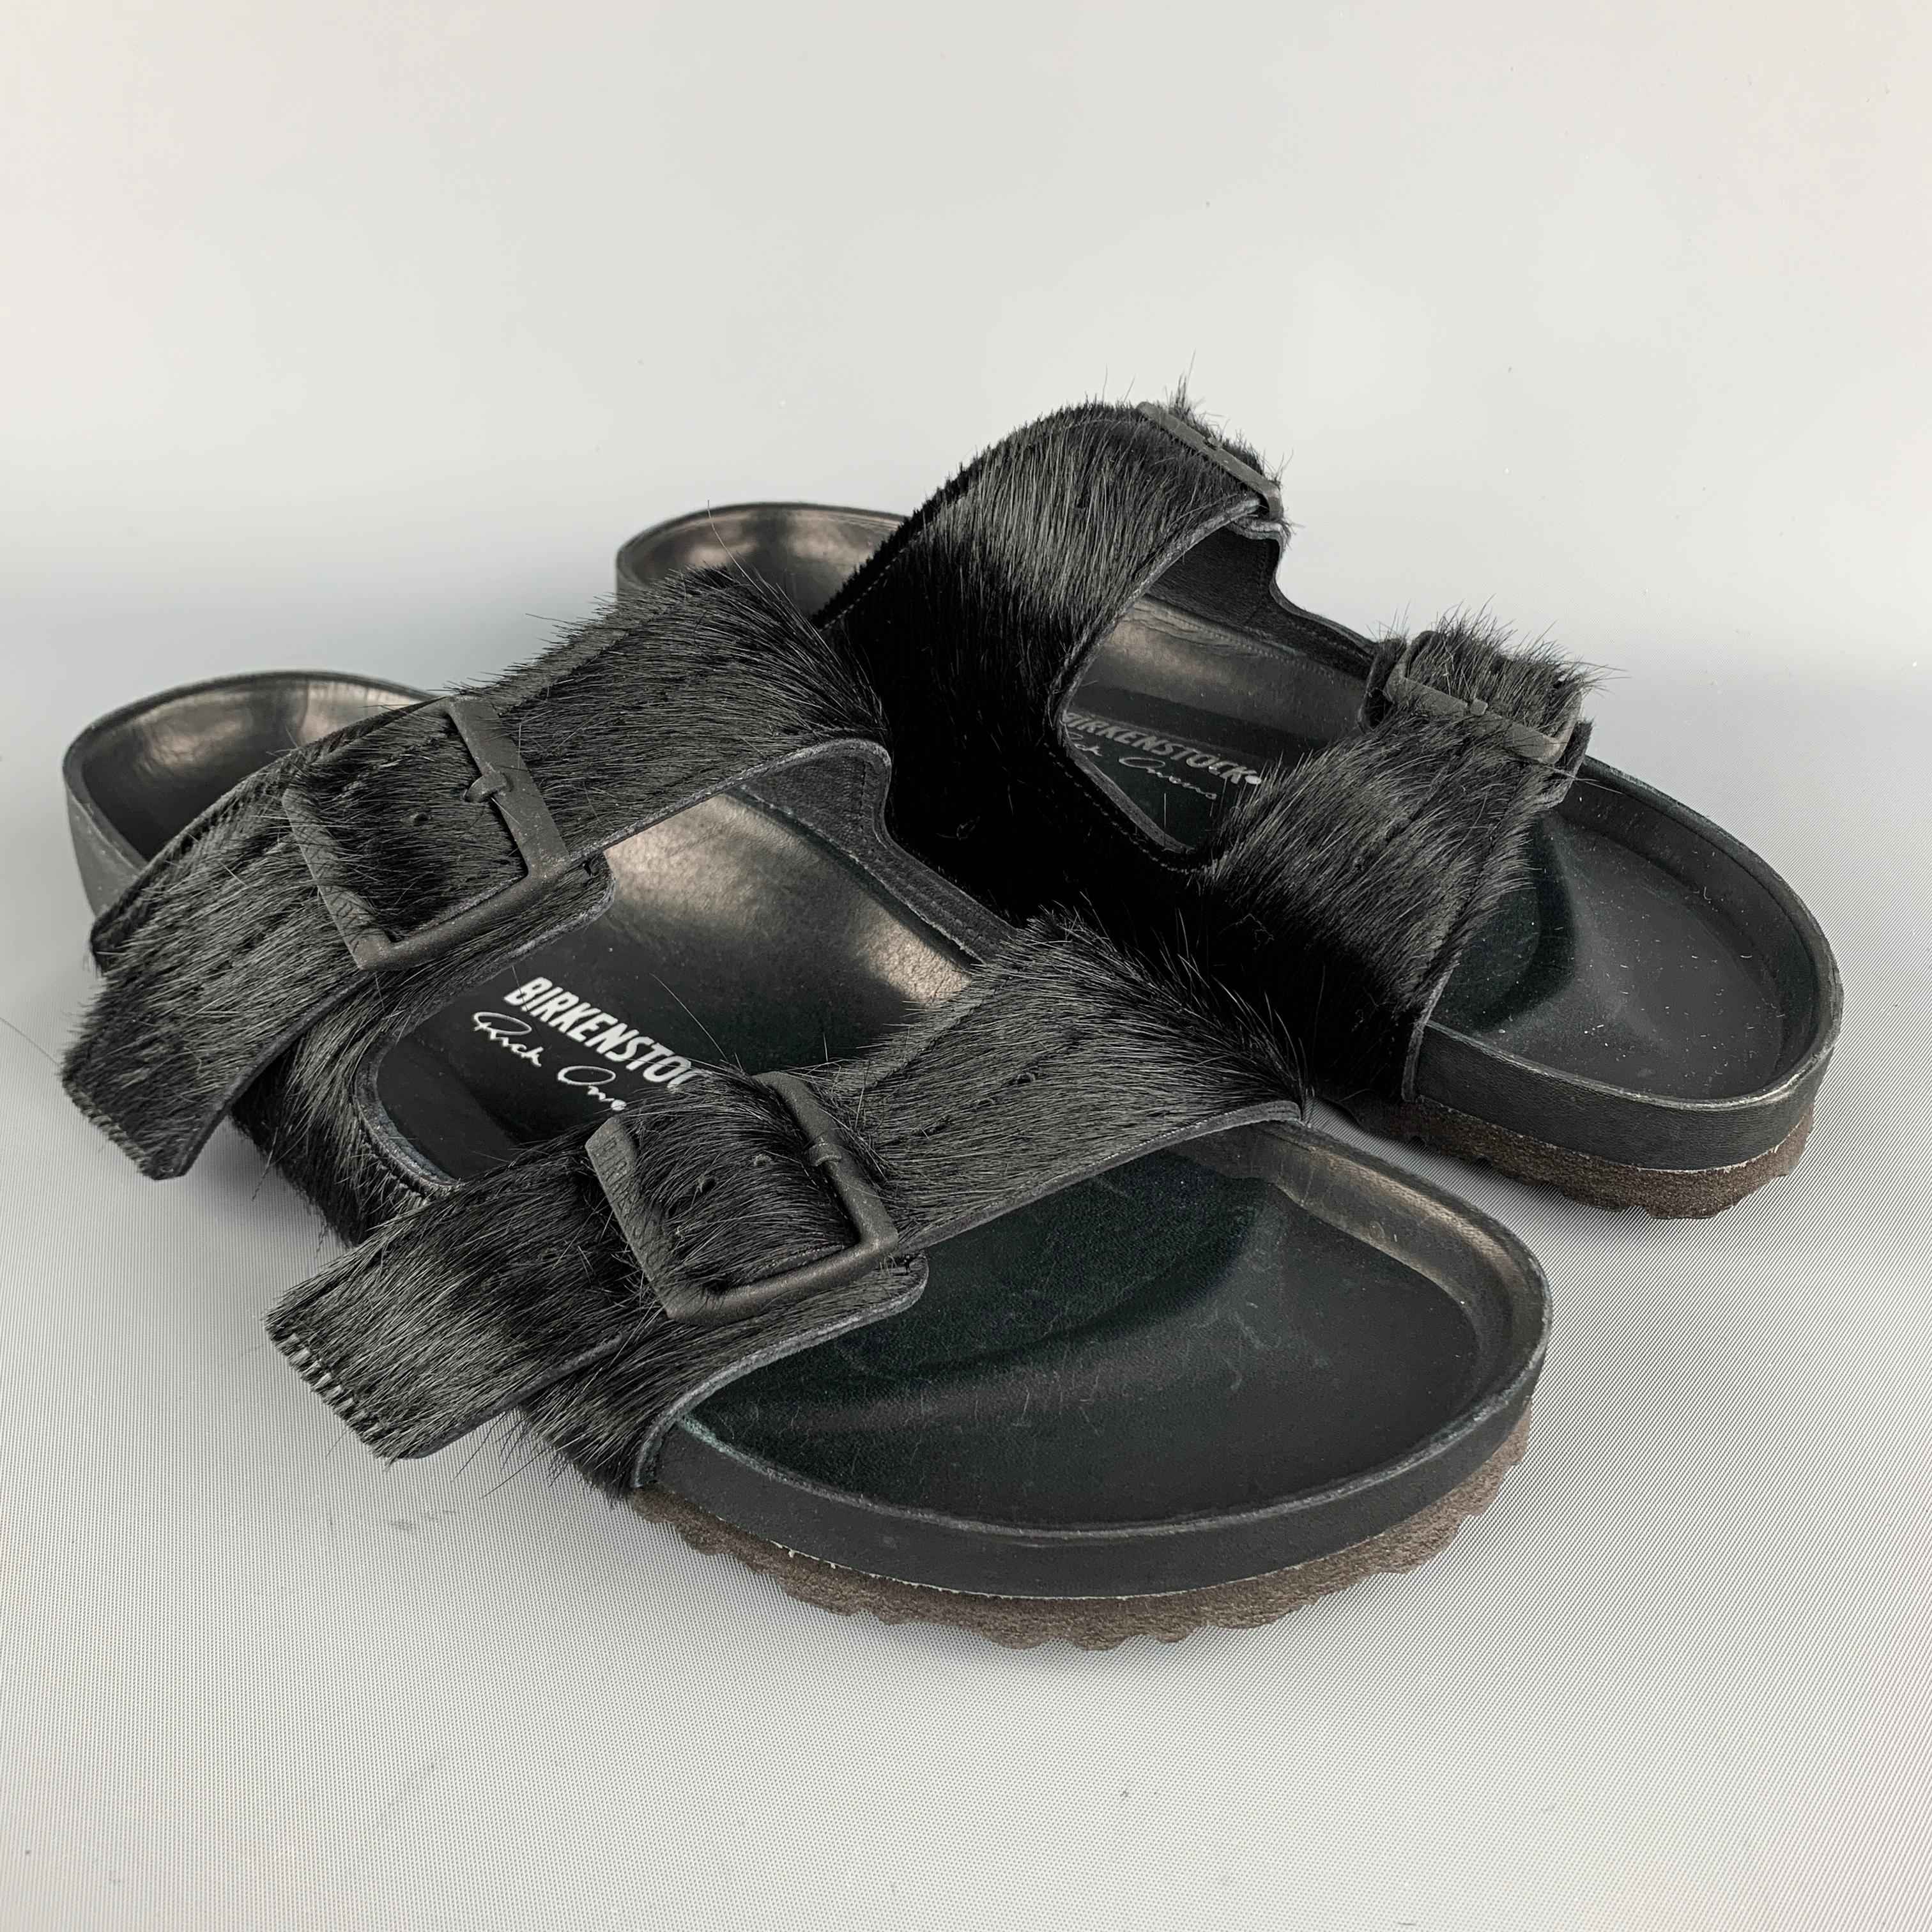 BIRKENSTOCK by RICK OWENS comes in a black textured pony hair material, double belted, with an embossed “Rick Owens” detailed insole, a black matte finish metal buckle, and a rubber sole. 

Excellent Pre-Owned Condition.
Marked: EU 44  285